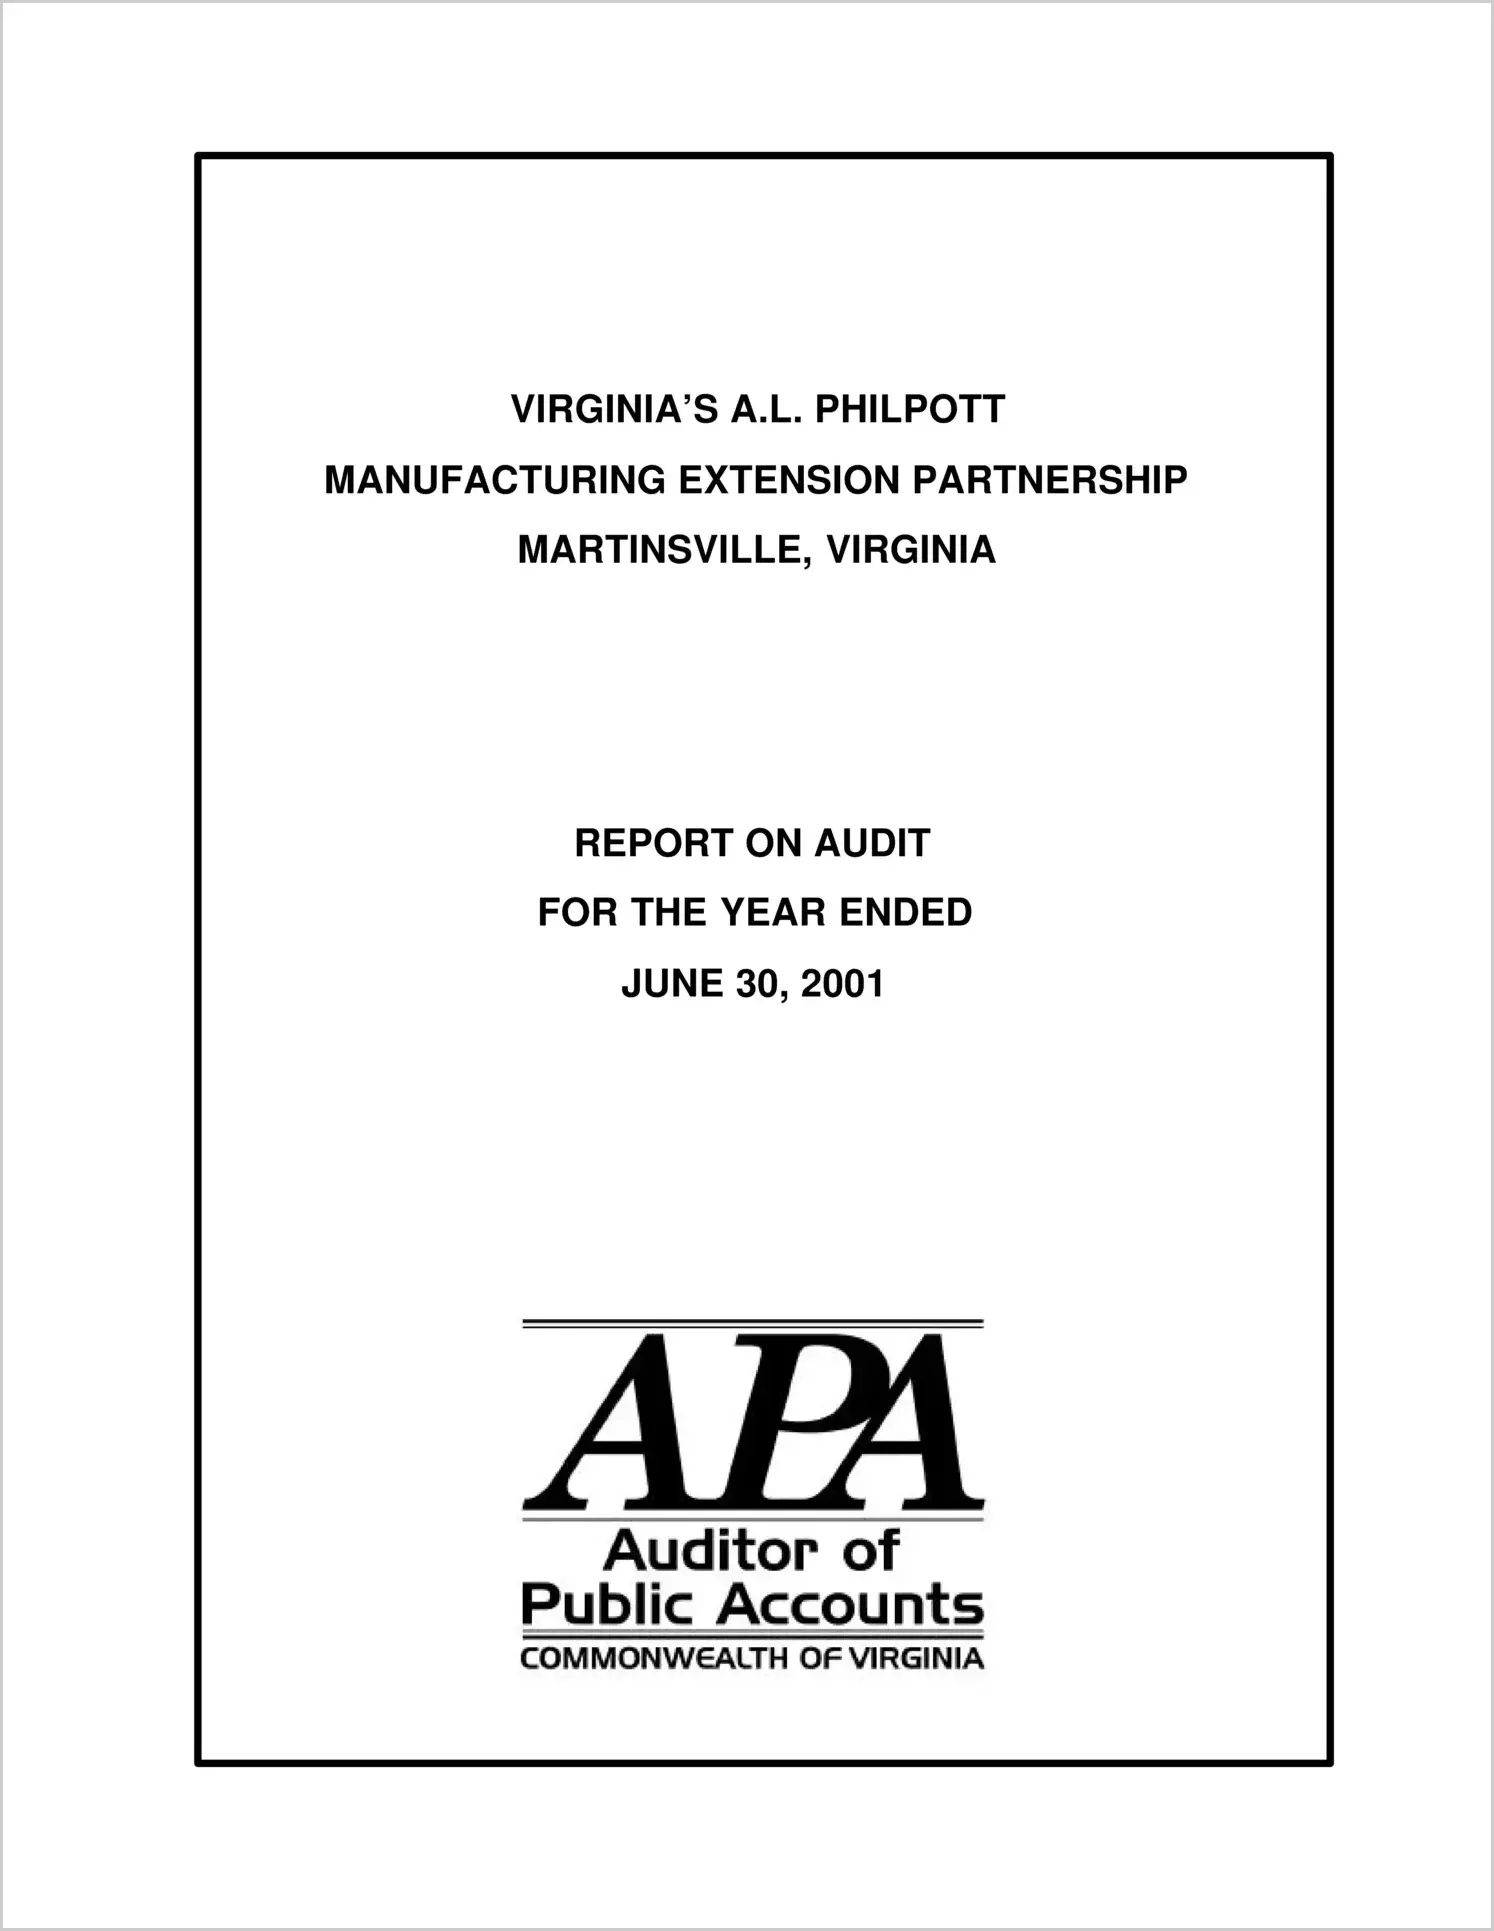 Virginia`s A. L. Philpott Manufacturing Extension Partnership for the year ended June 30, 2001